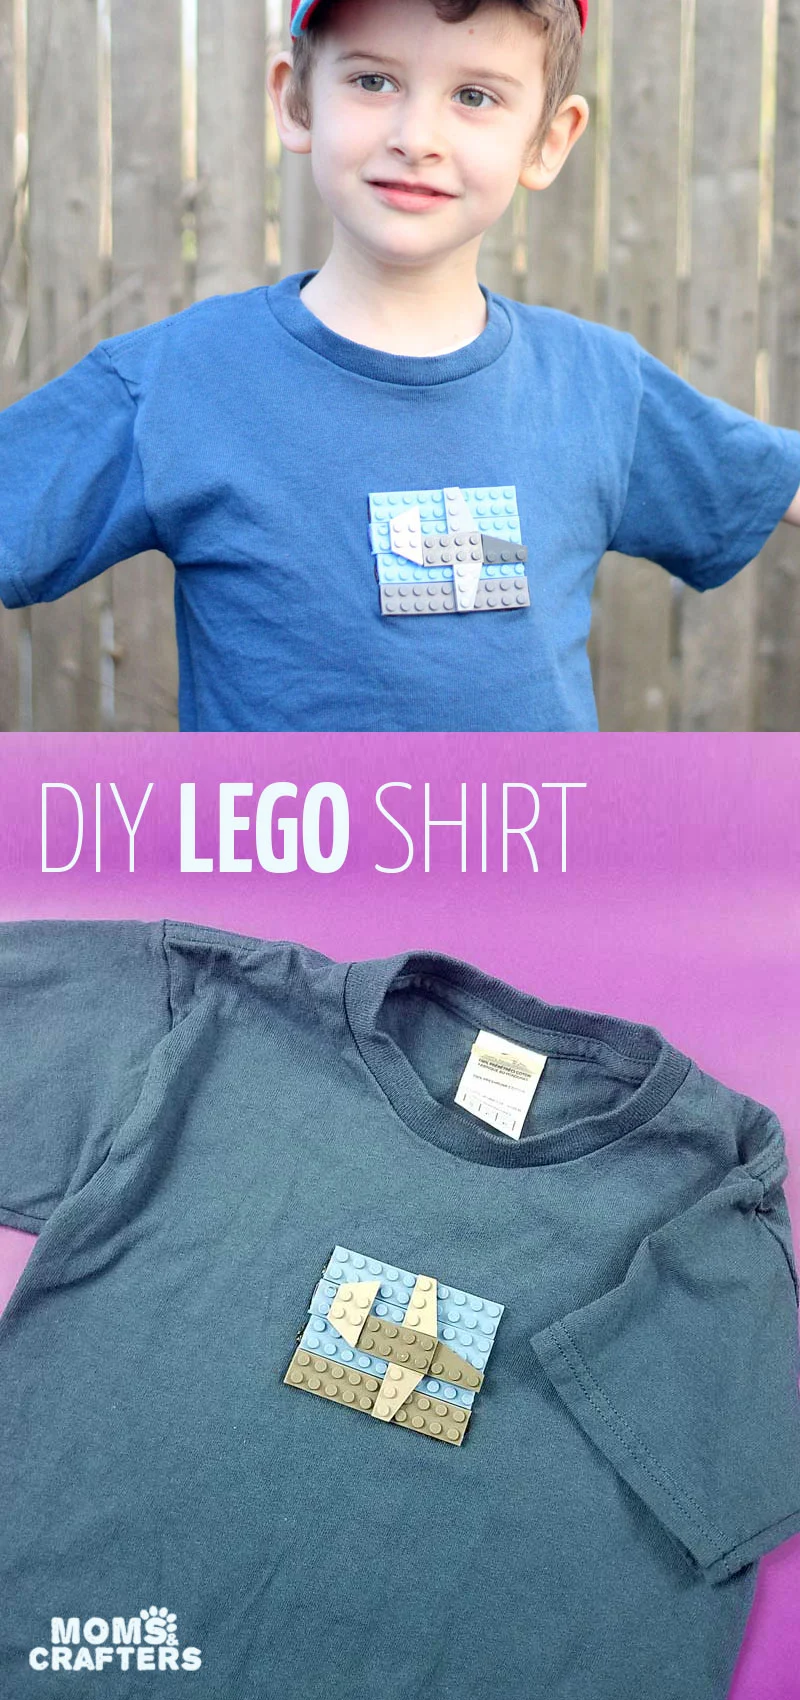 Click for instructions to create an adorable DIY LEGOs t-shirt for your boy or girl! This cool plain t-shirt update is so cute for LEGO fans and one of my favorite LEGO crafts ever! #lego #diy #t-shirt #fashion #kidfashion #legofan #momsandcrafters 